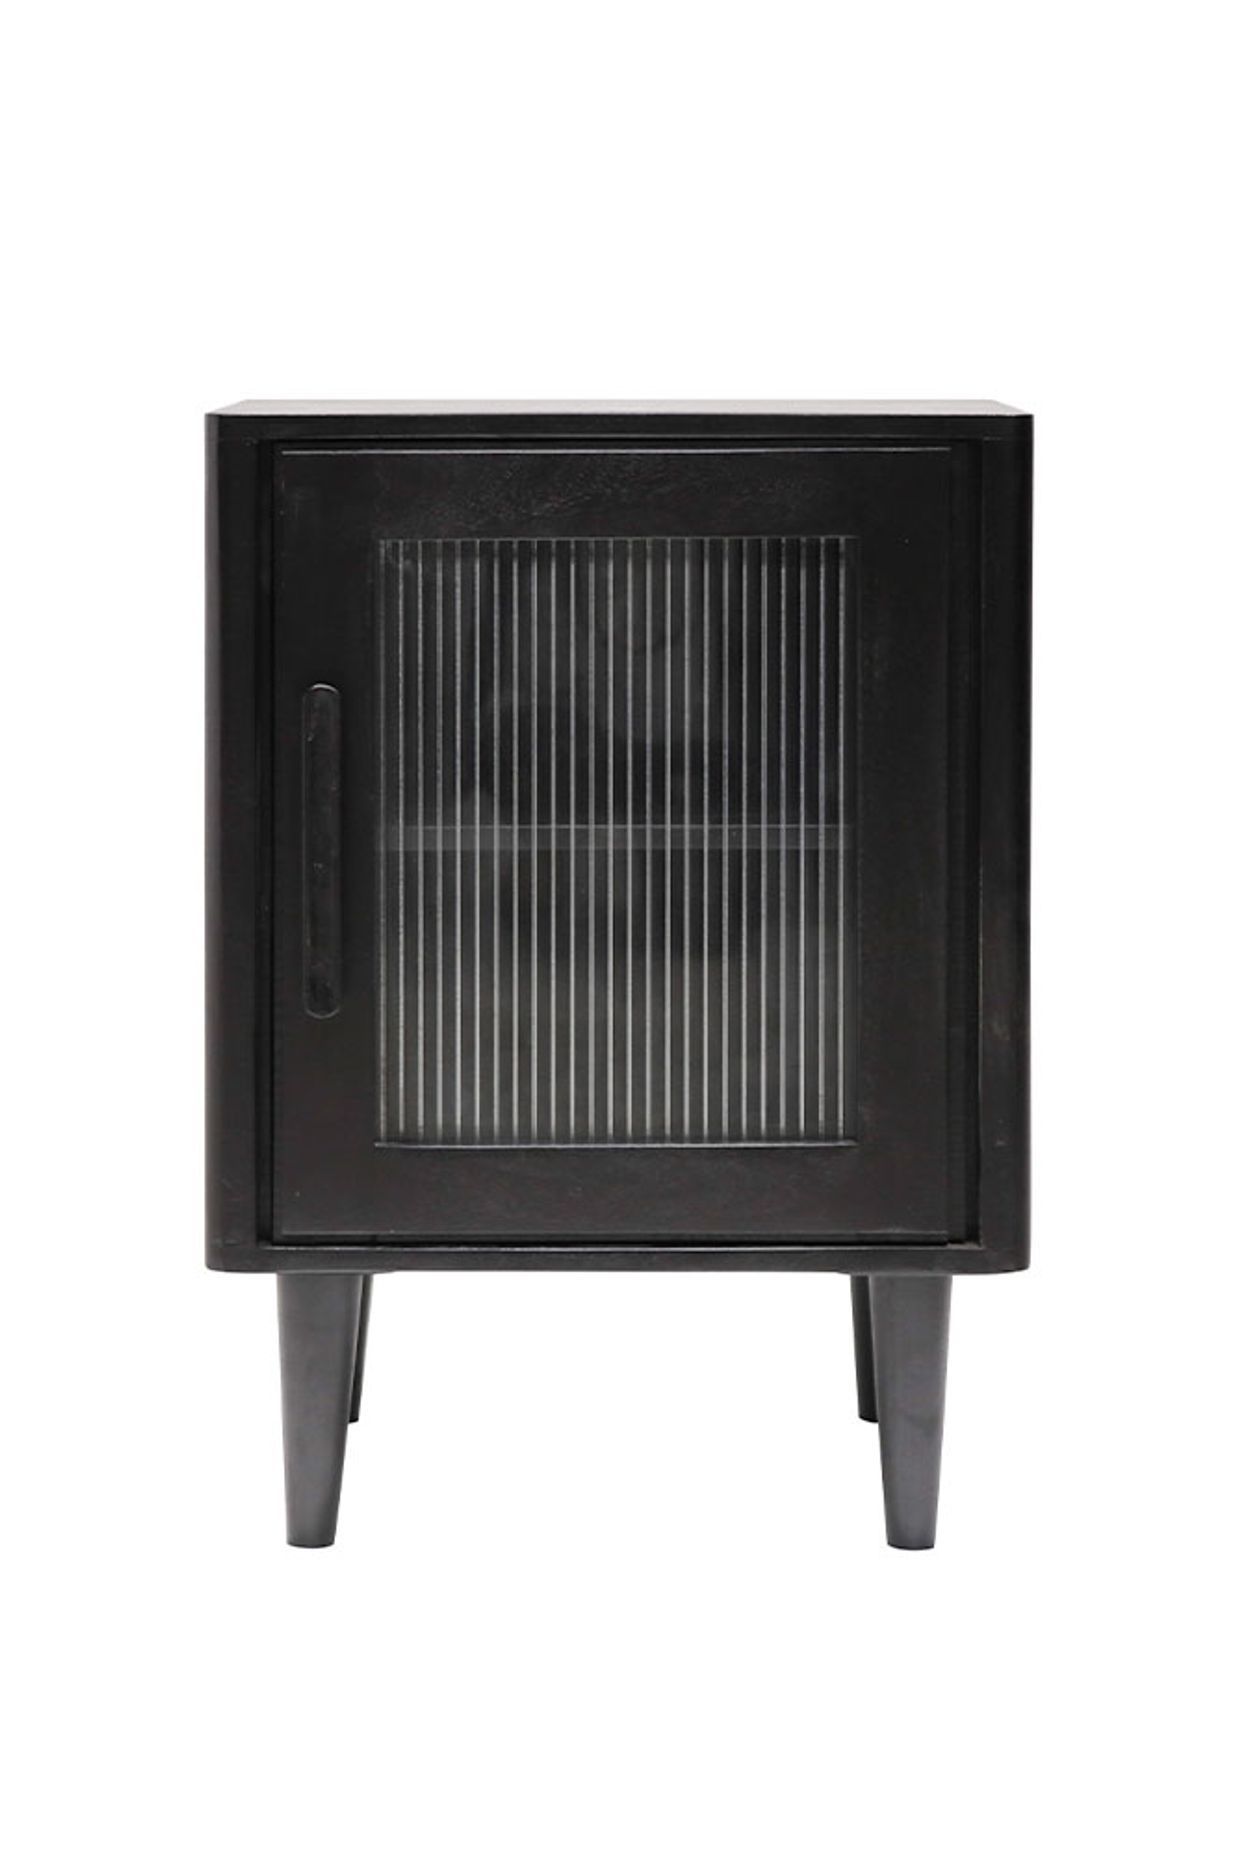 Incorporate fluted glass into your bedroom furniture - this slick black Tate glass bedside from Hawthorne collections is a perfectly elegant way to incorprate fluted glass in your bedroom.